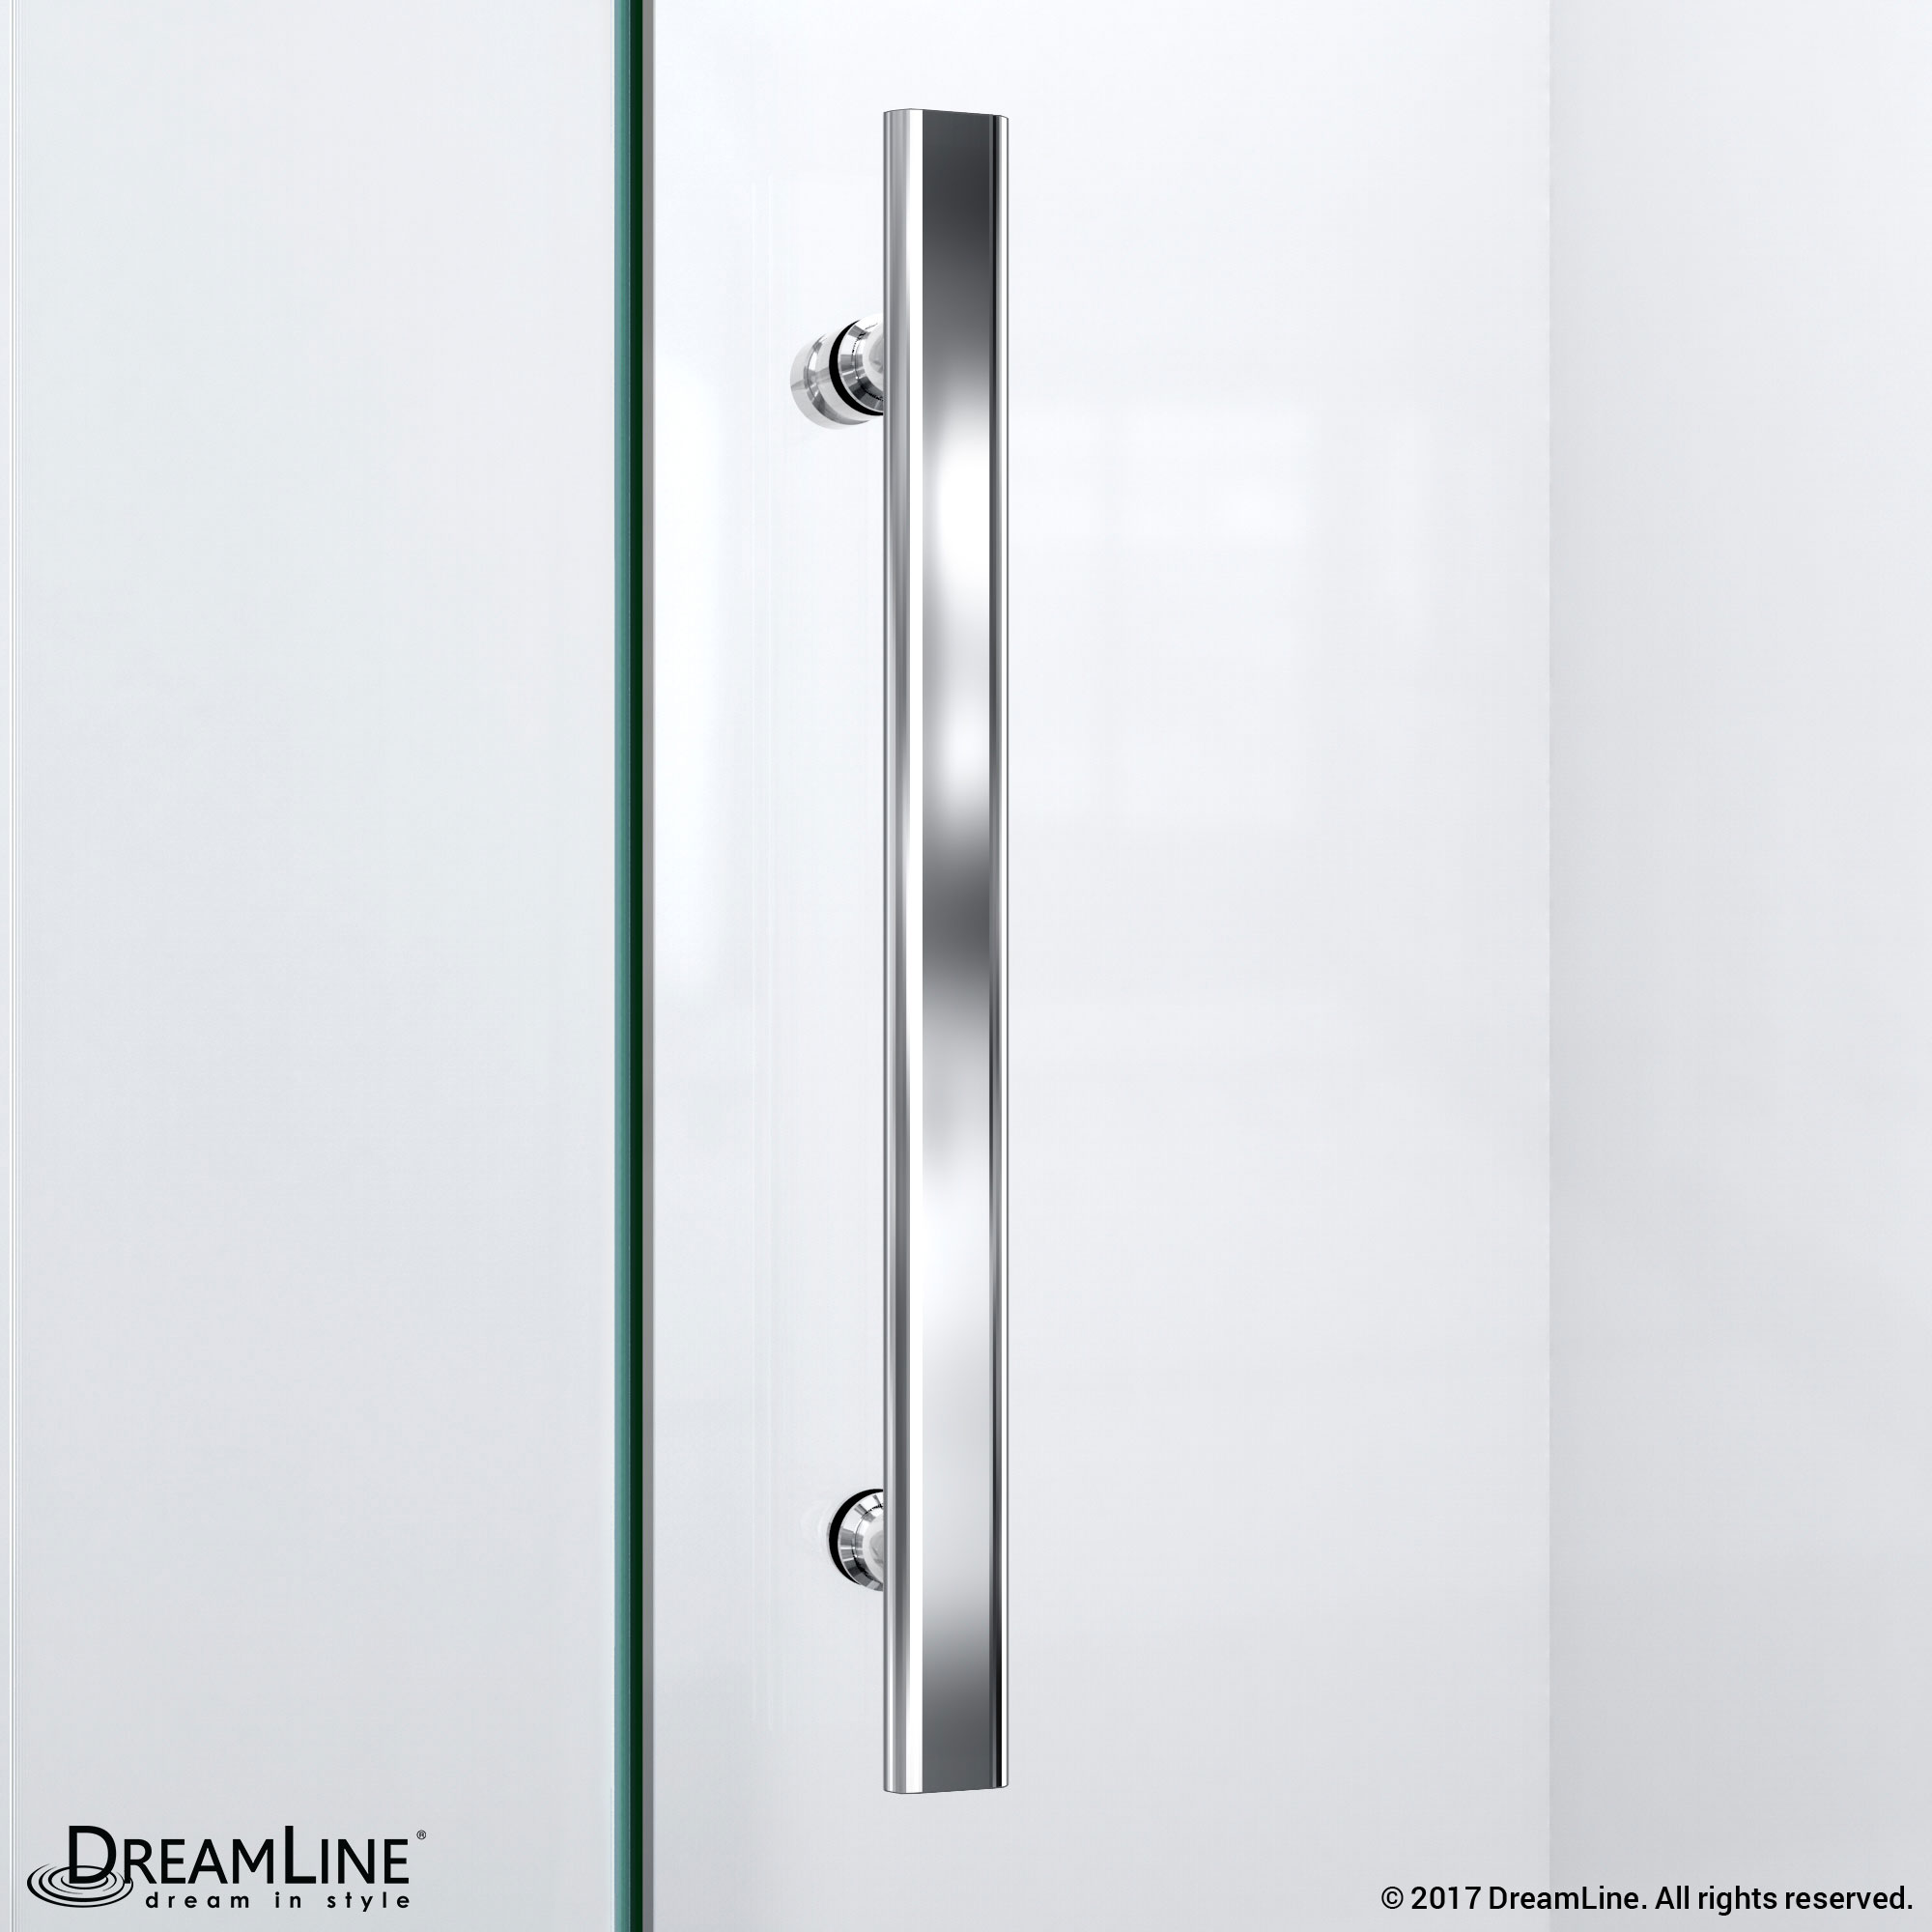 DreamLine Prism Lux 38 in. D x 38 in. W x 74 3/4 in. H Hinged Shower Enclosure in Chrome with Corner Drain Black Base Kit